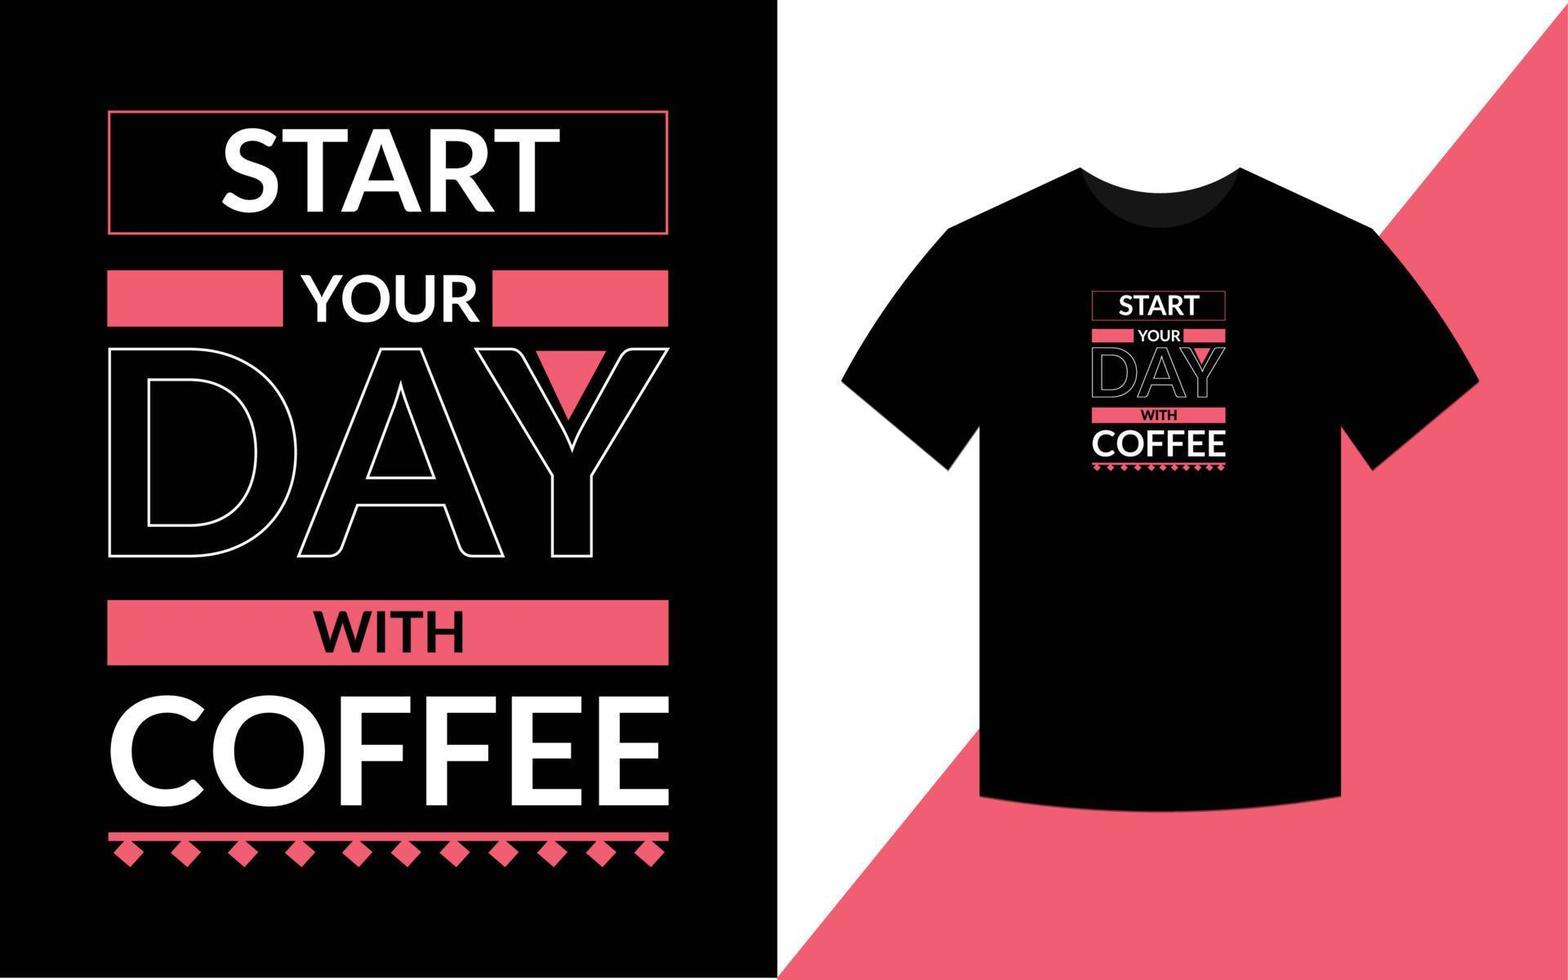 Start your day with coffee Typography Inspirational Quotes t shirt design for fashion apparel printing. vector